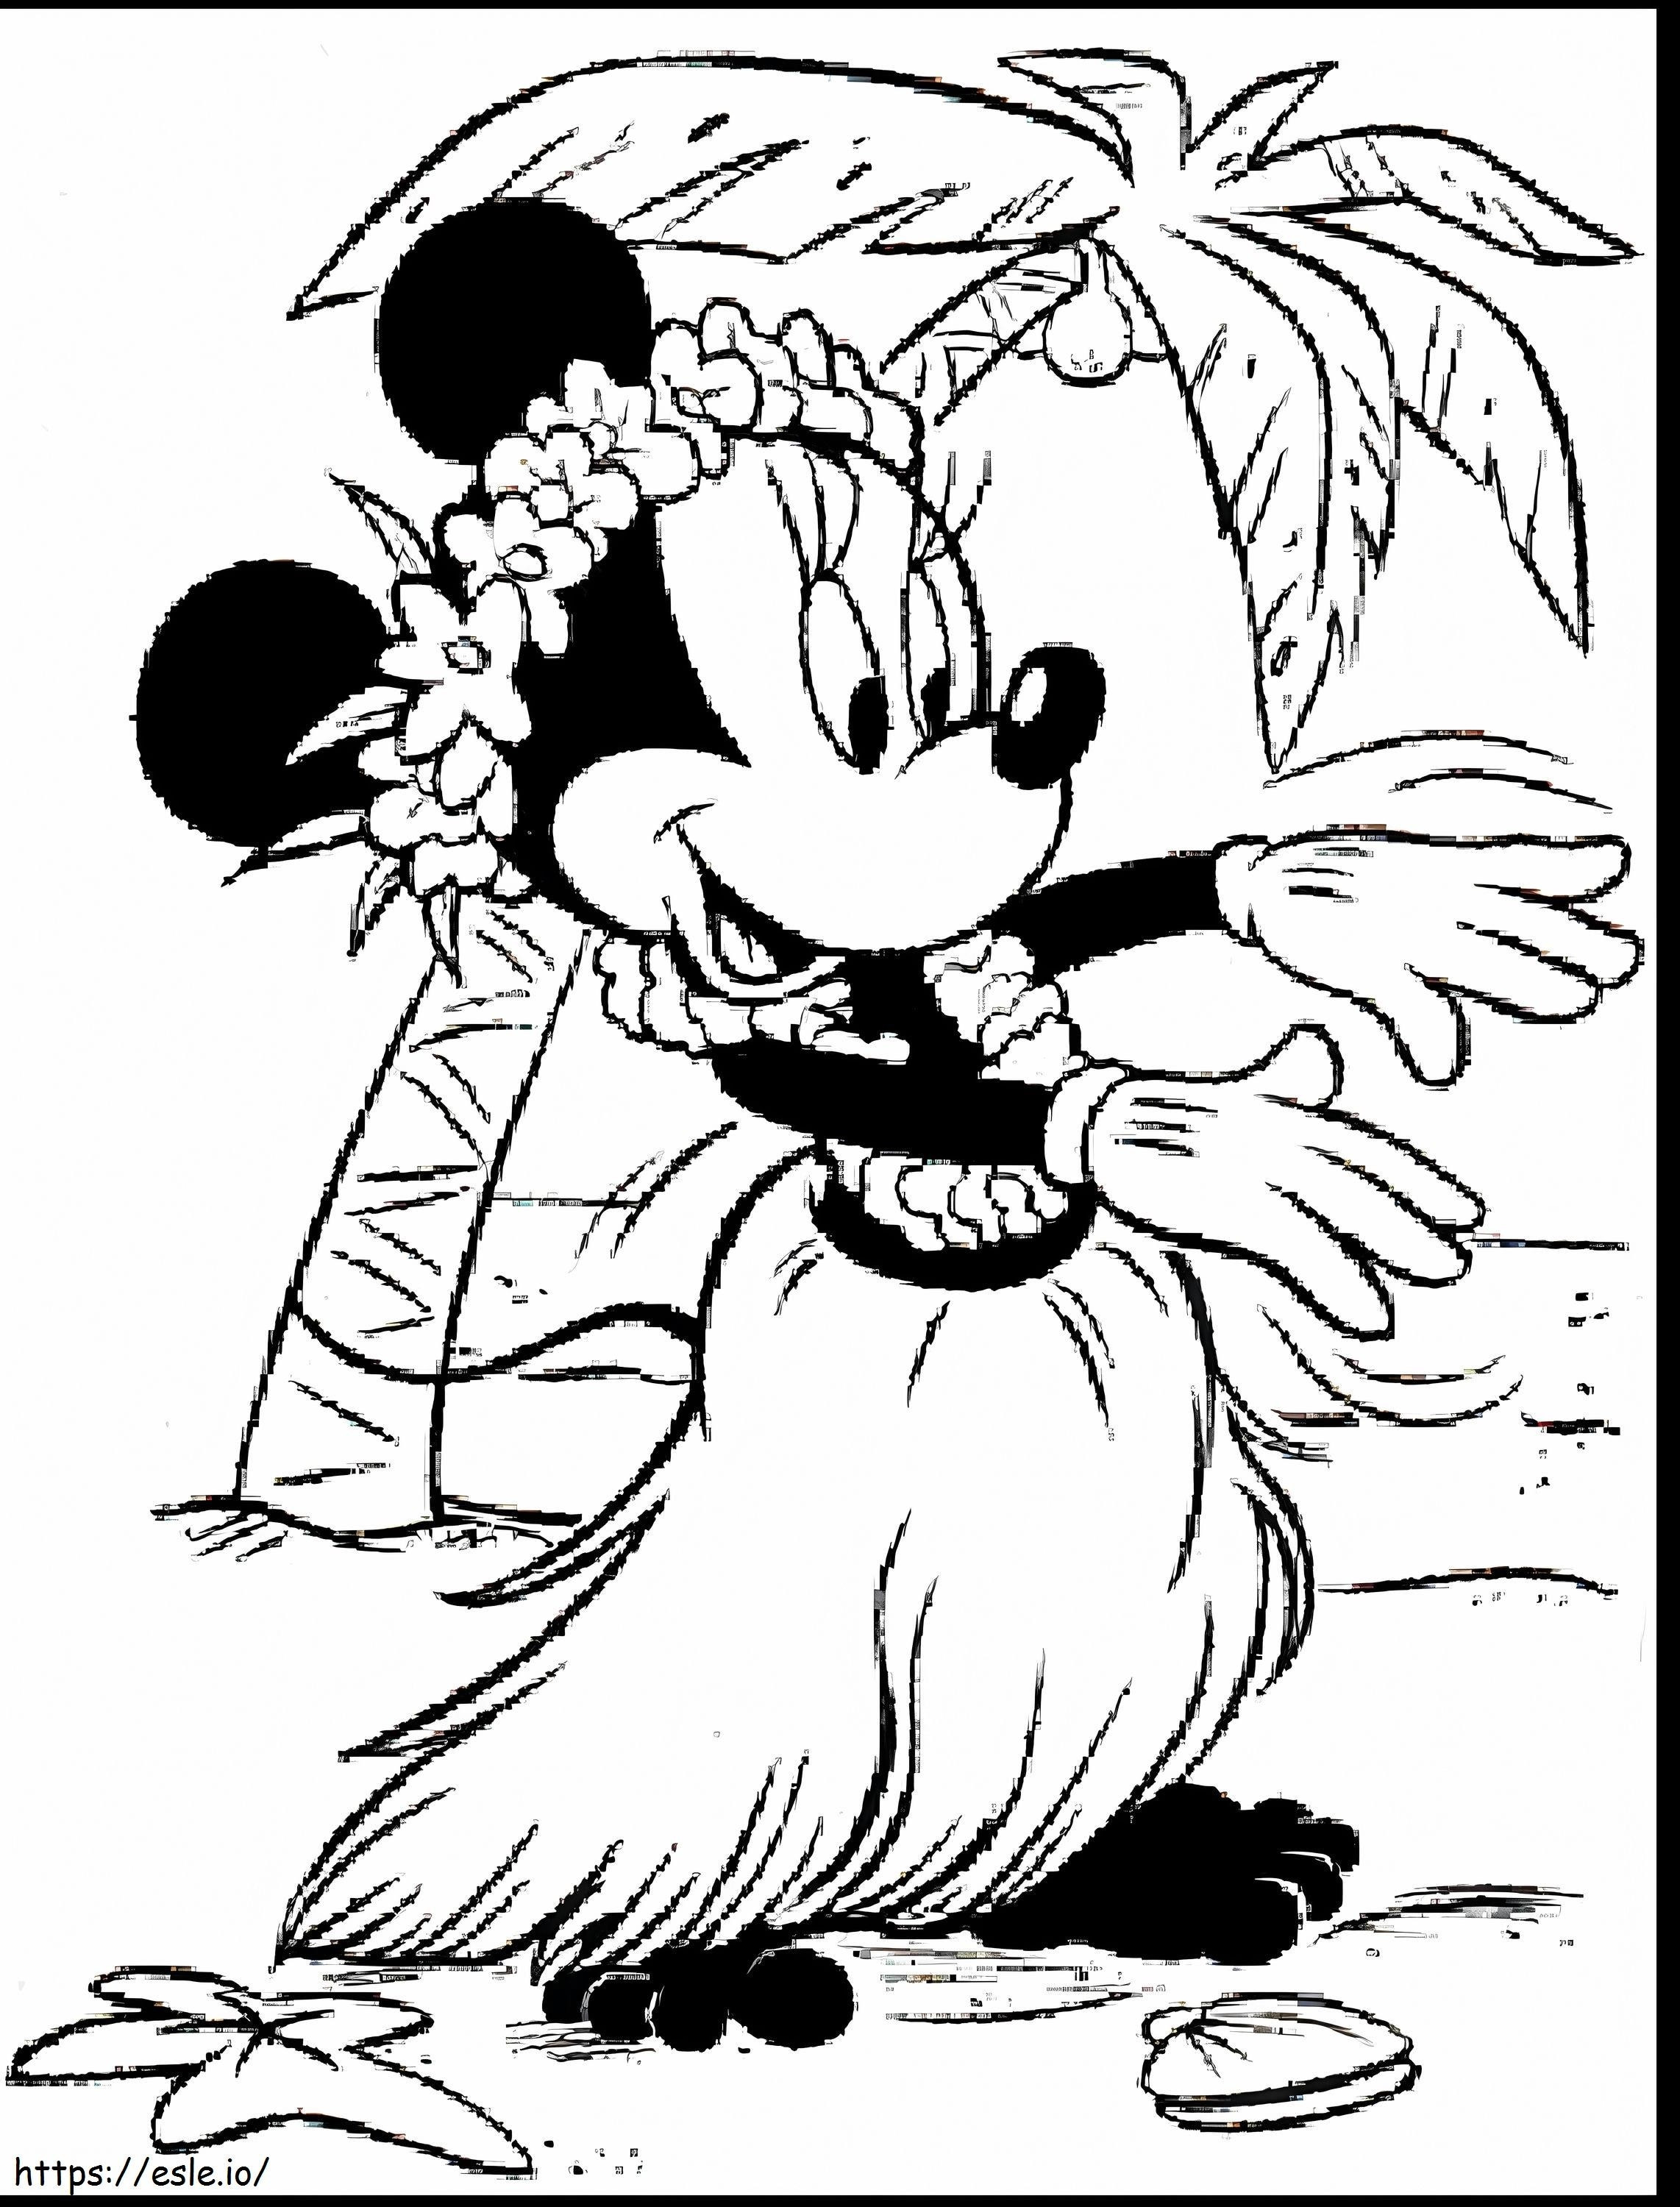 Minnie Dancing On The Beach coloring page